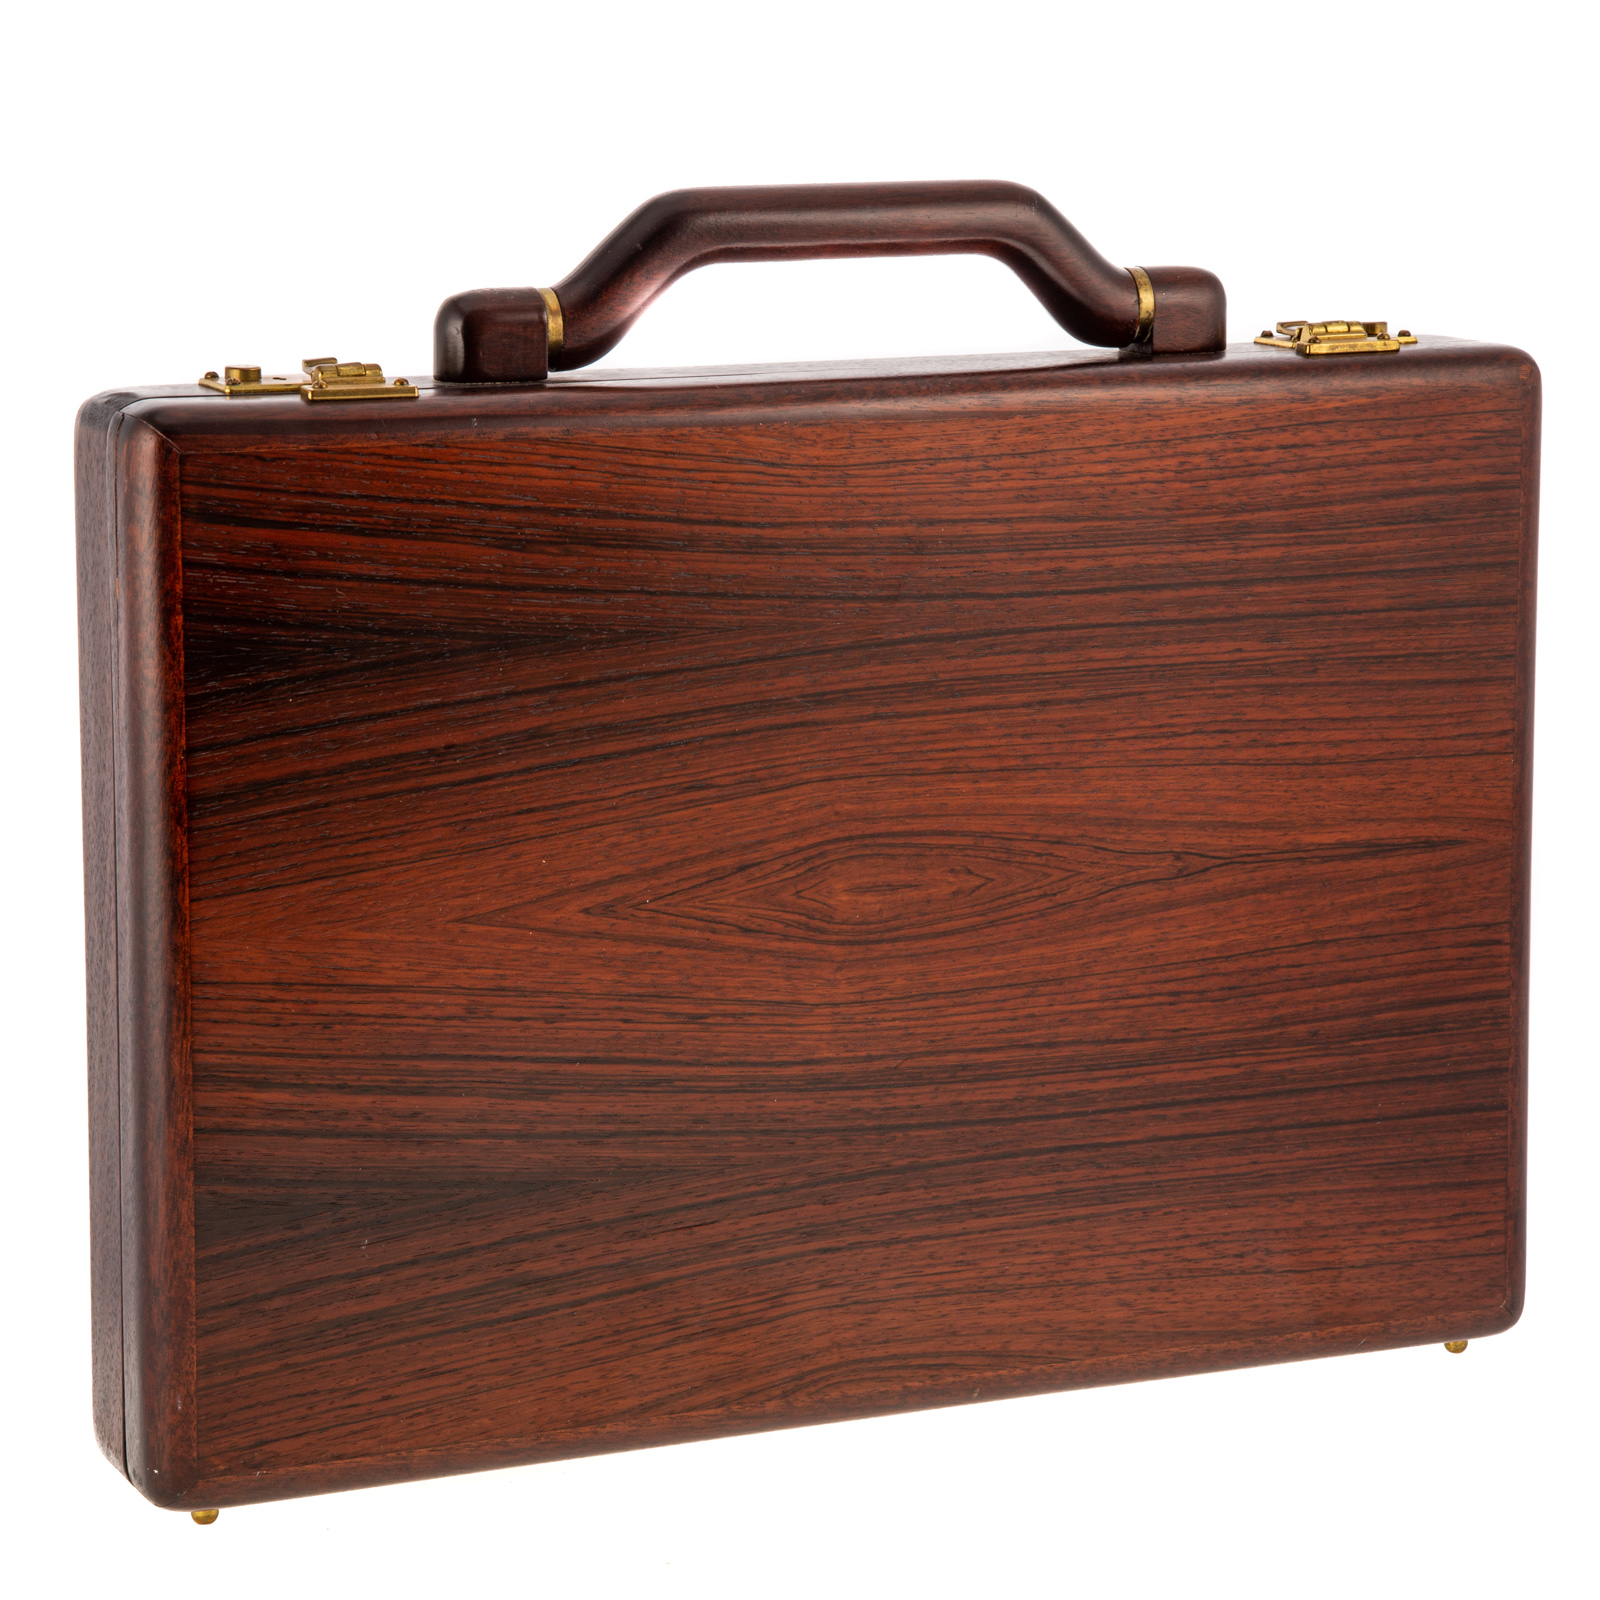 ROSEWOOD BRIEF CASE 20th century  2878a8